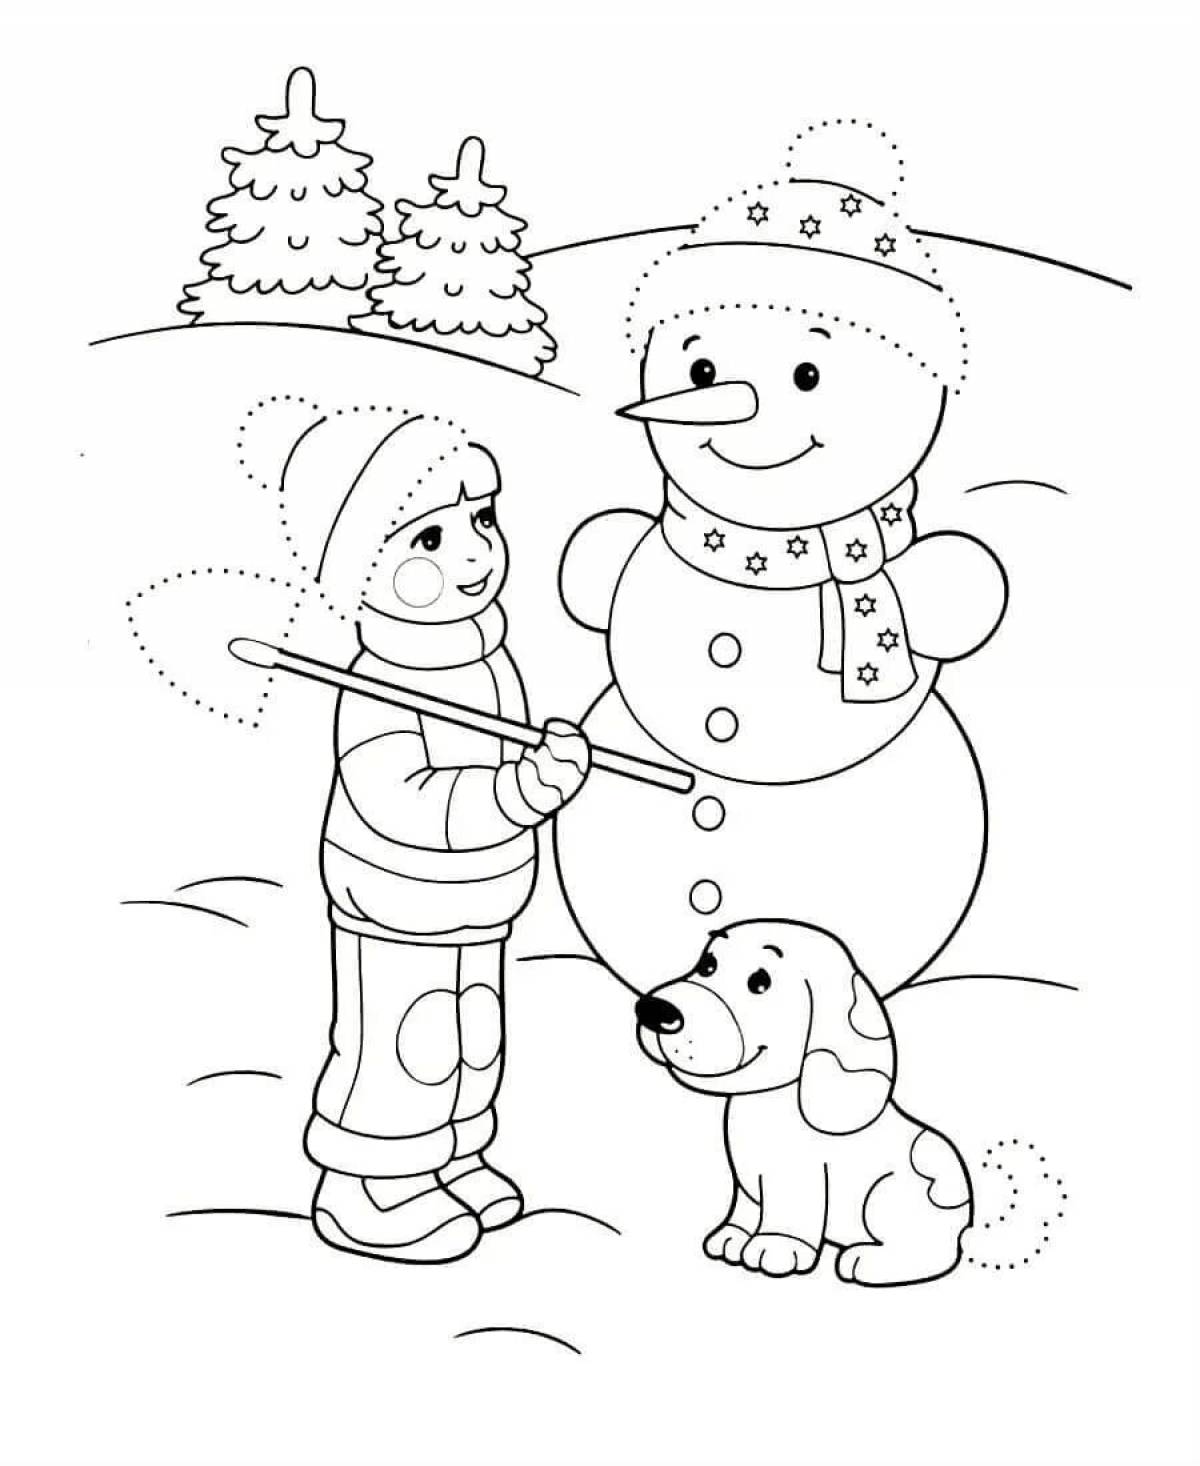 Fun winter coloring for 6 year olds